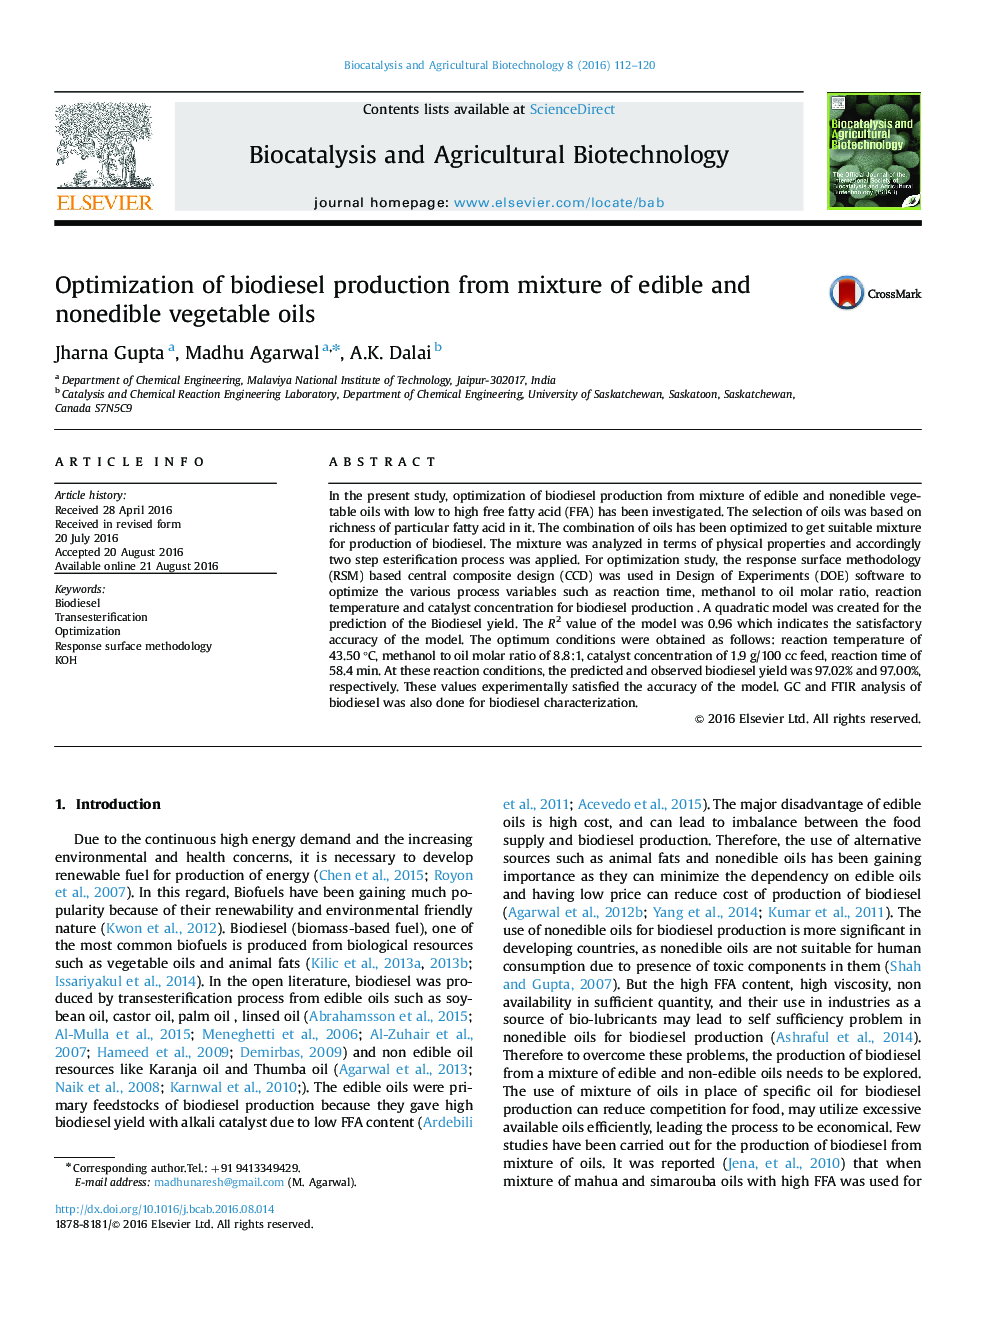 Optimization of biodiesel production from mixture of edible and nonedible vegetable oils